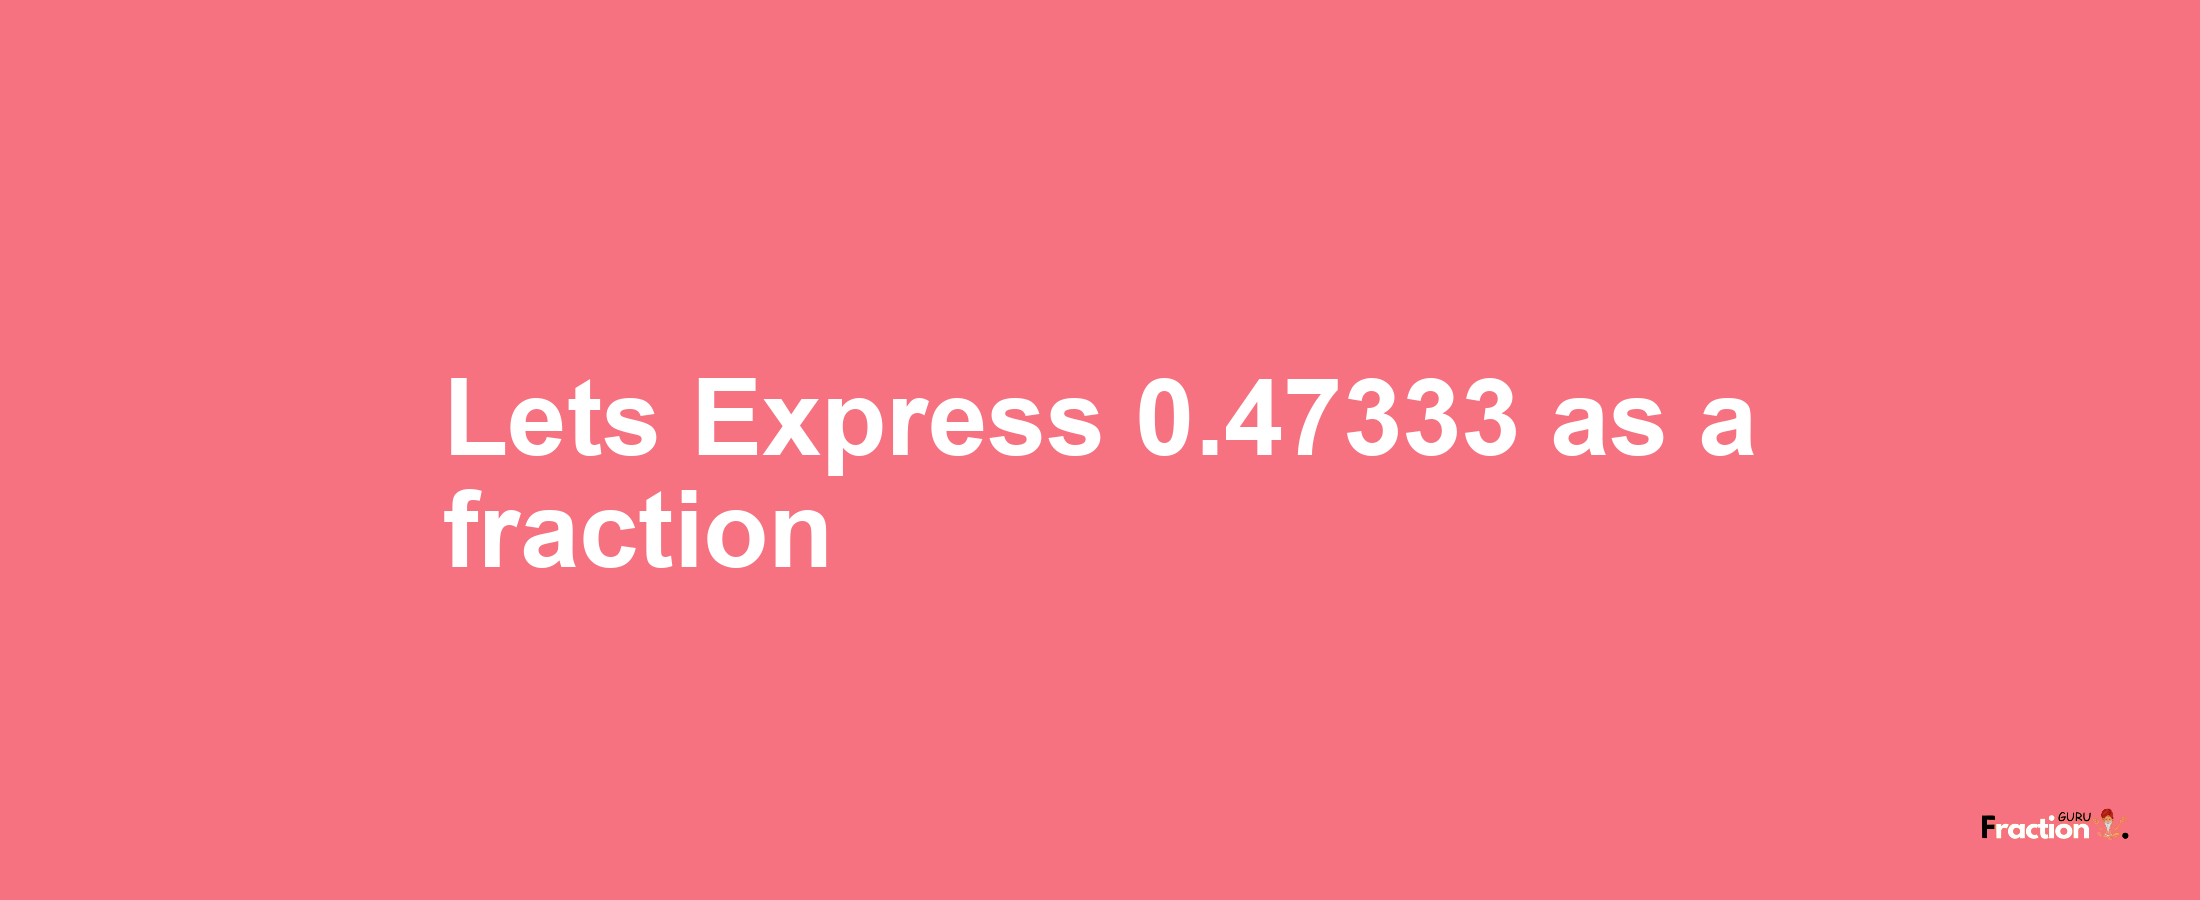 Lets Express 0.47333 as afraction